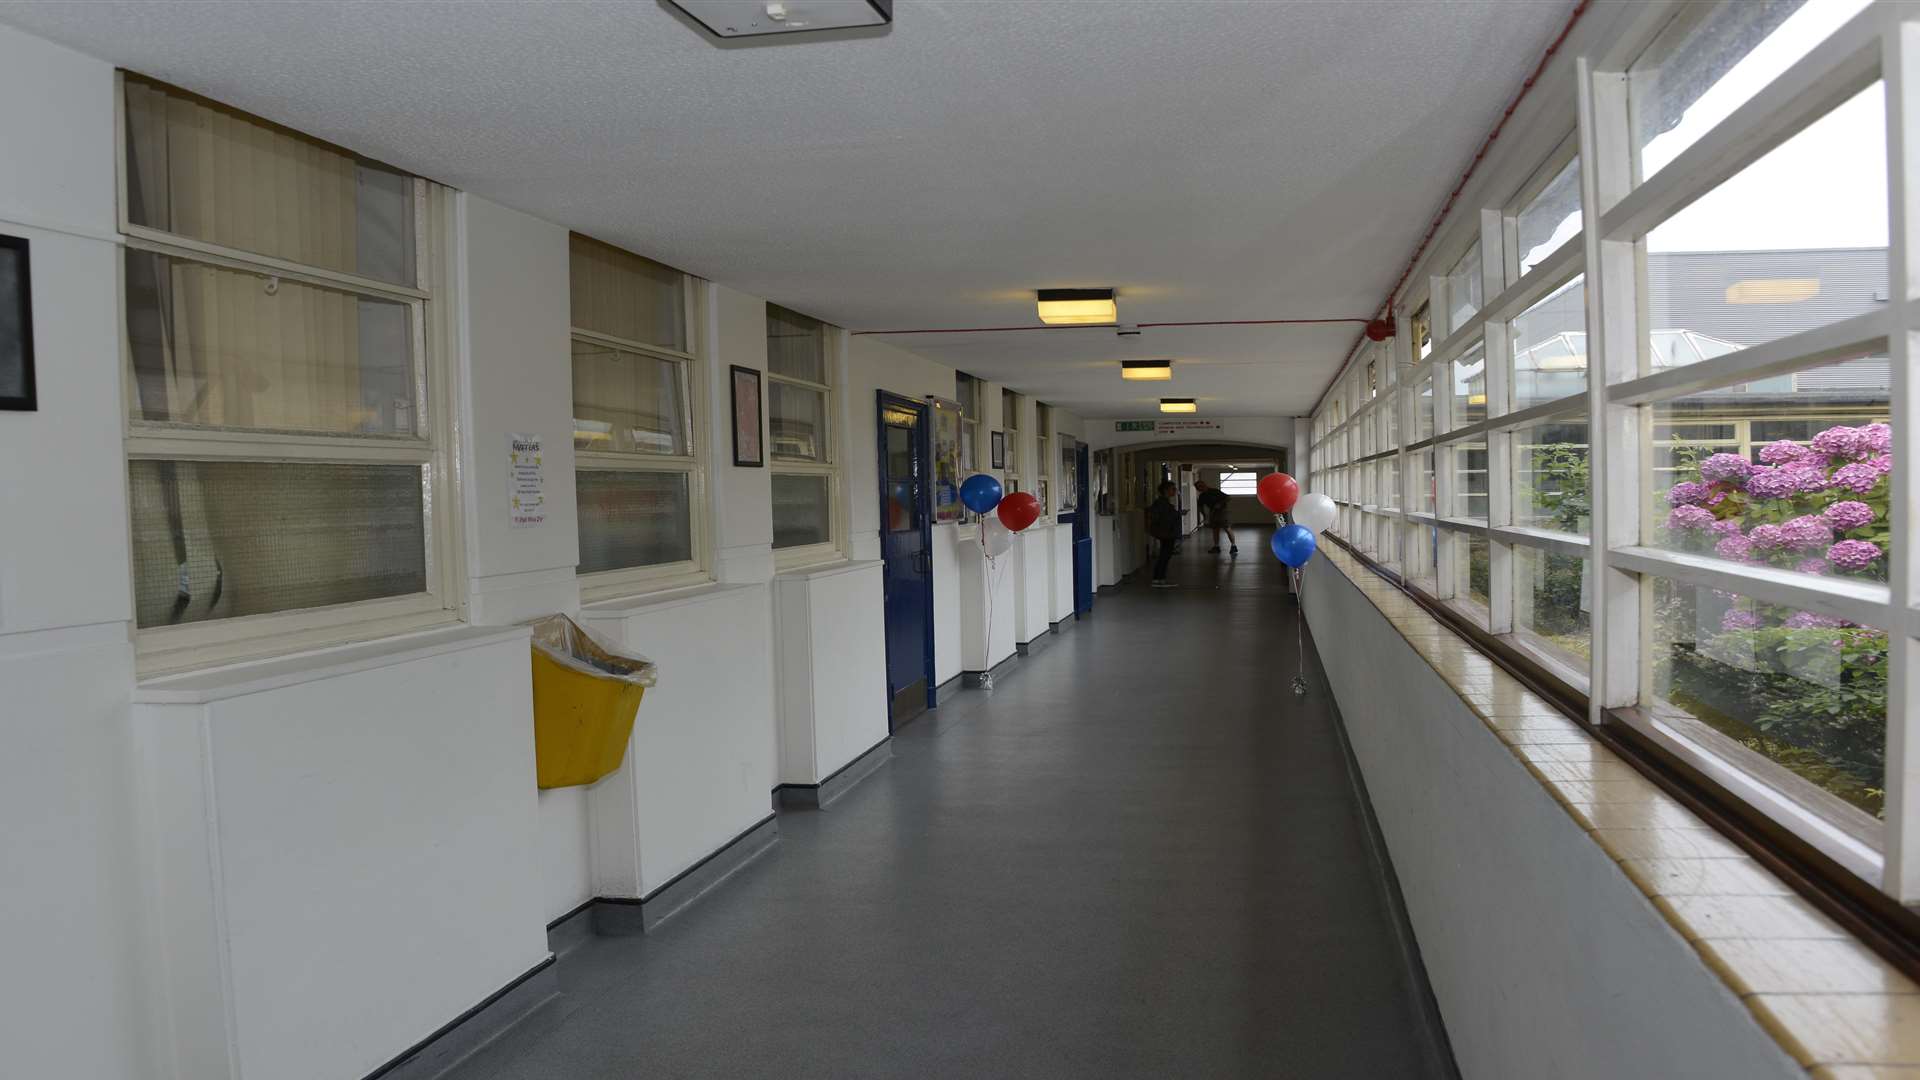 One of the long corridors within the old building